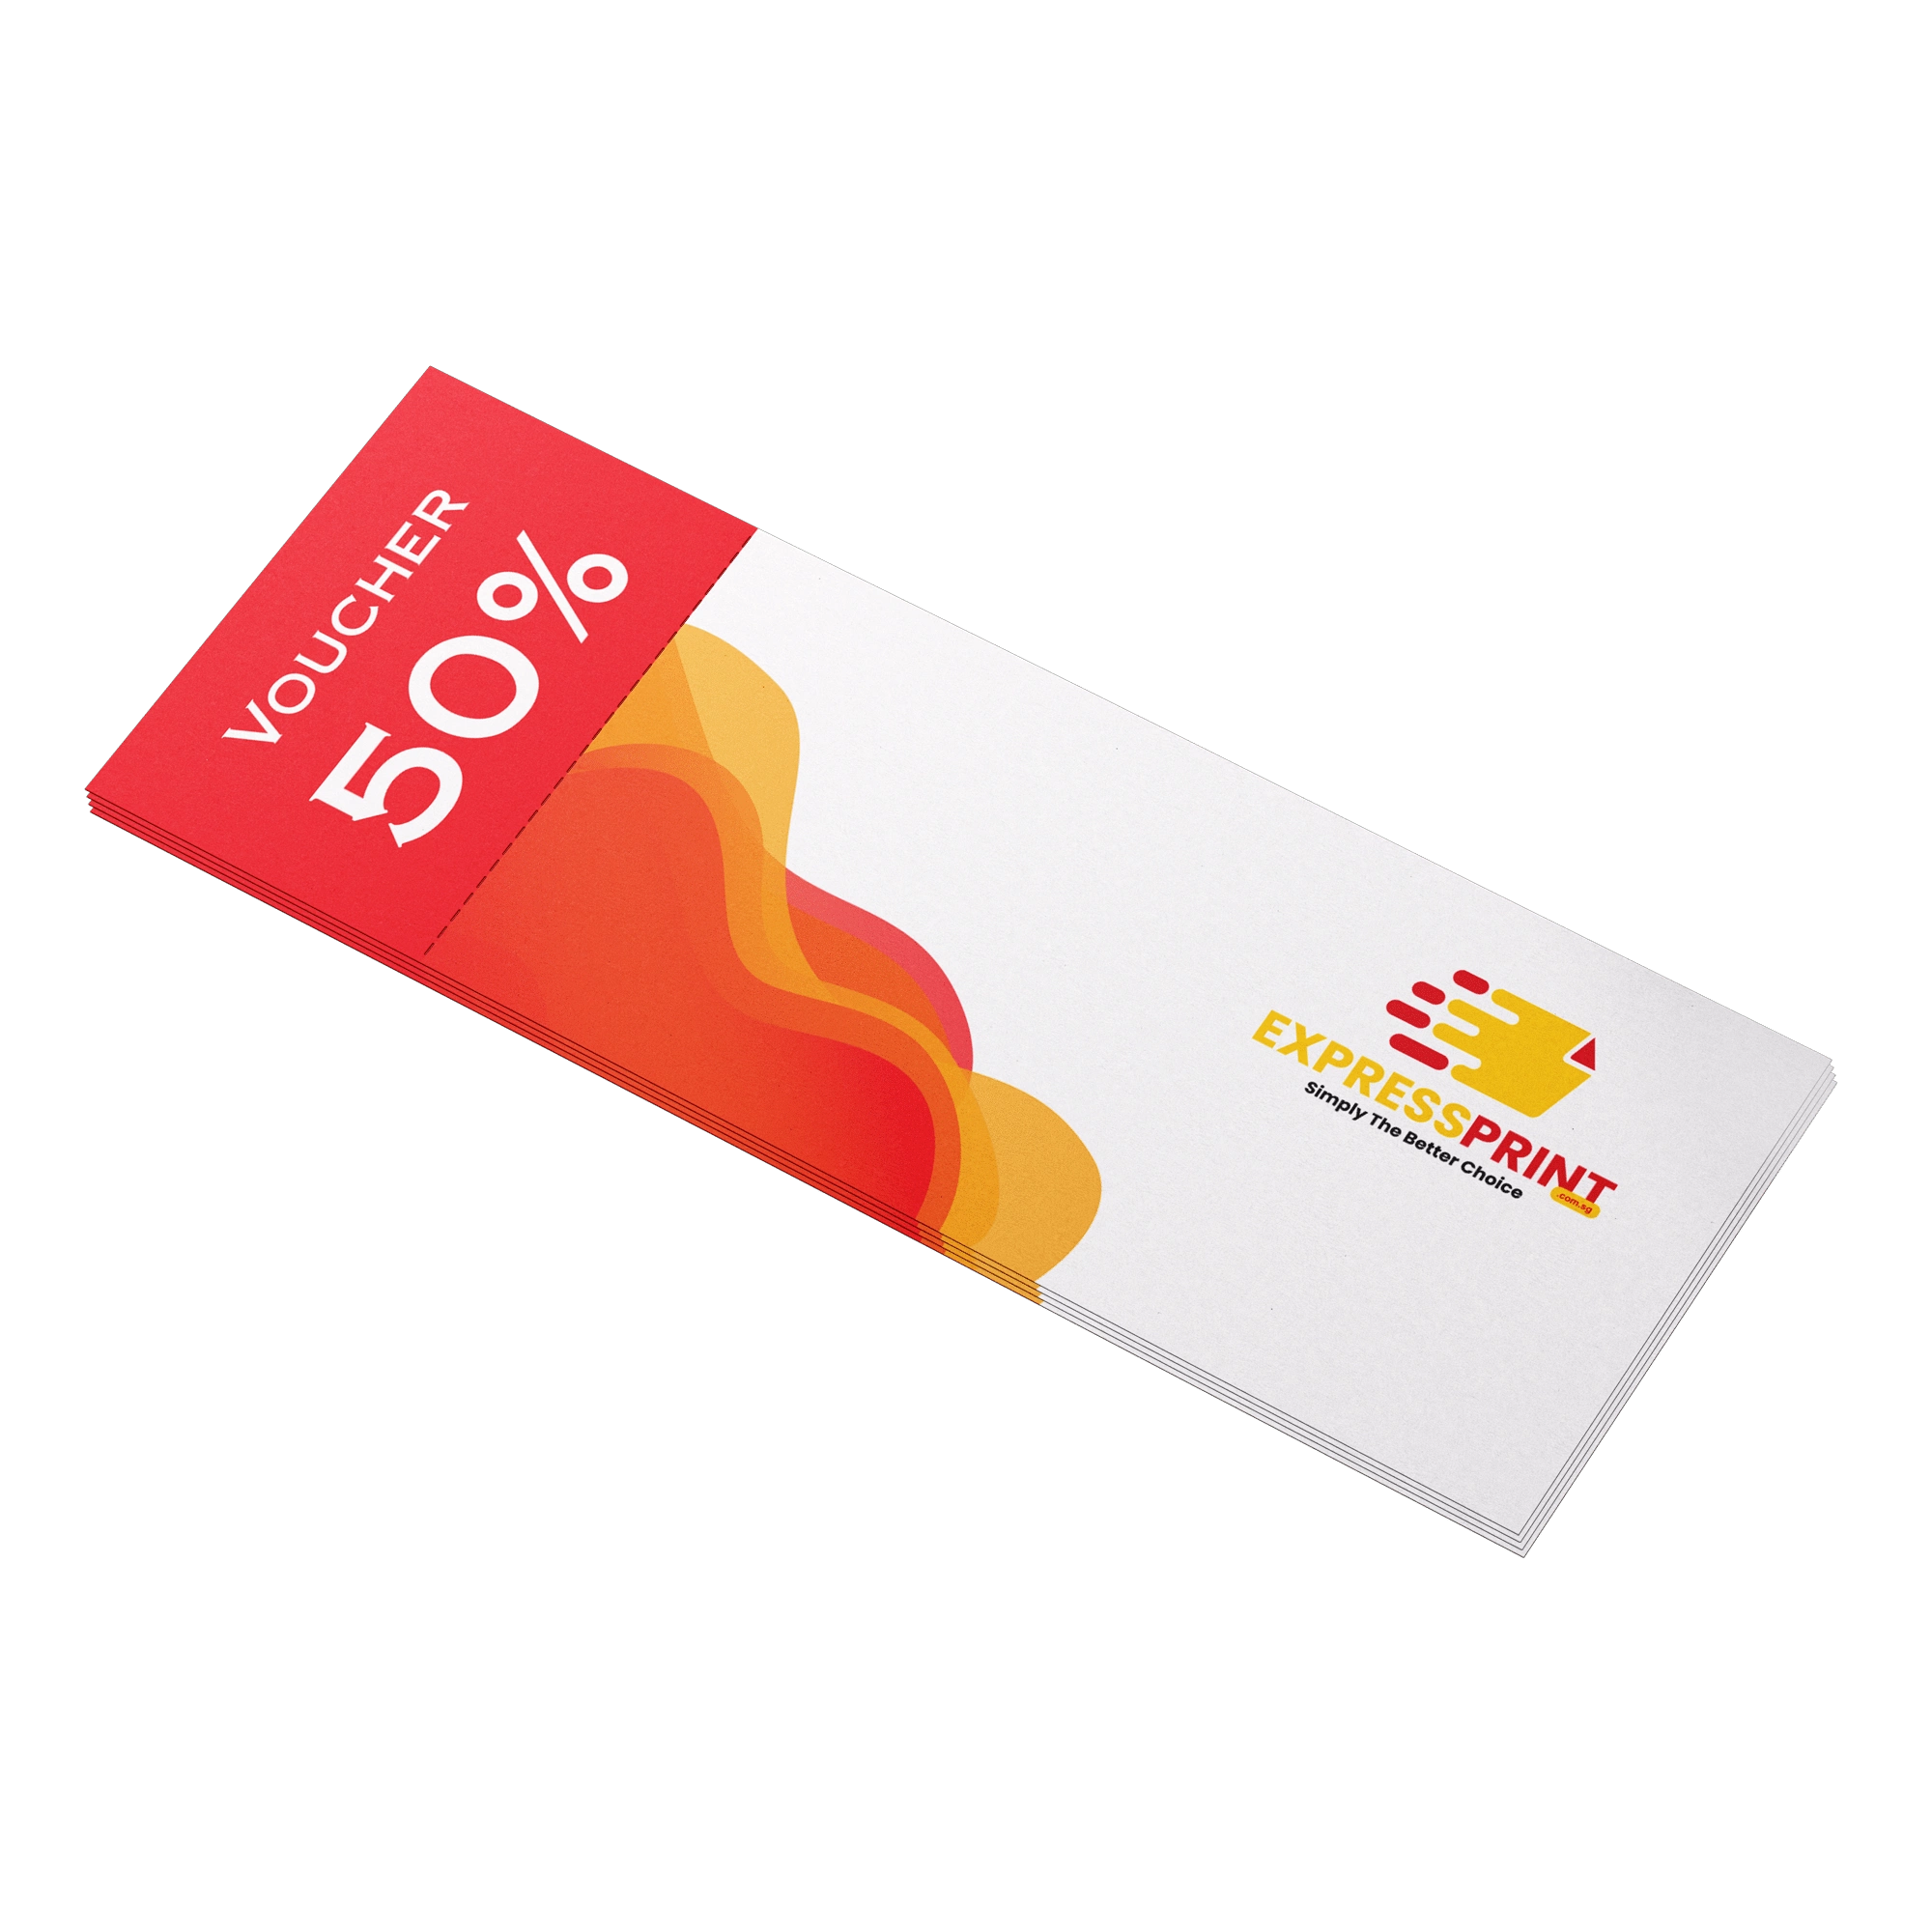 Customized Printing of Voucher